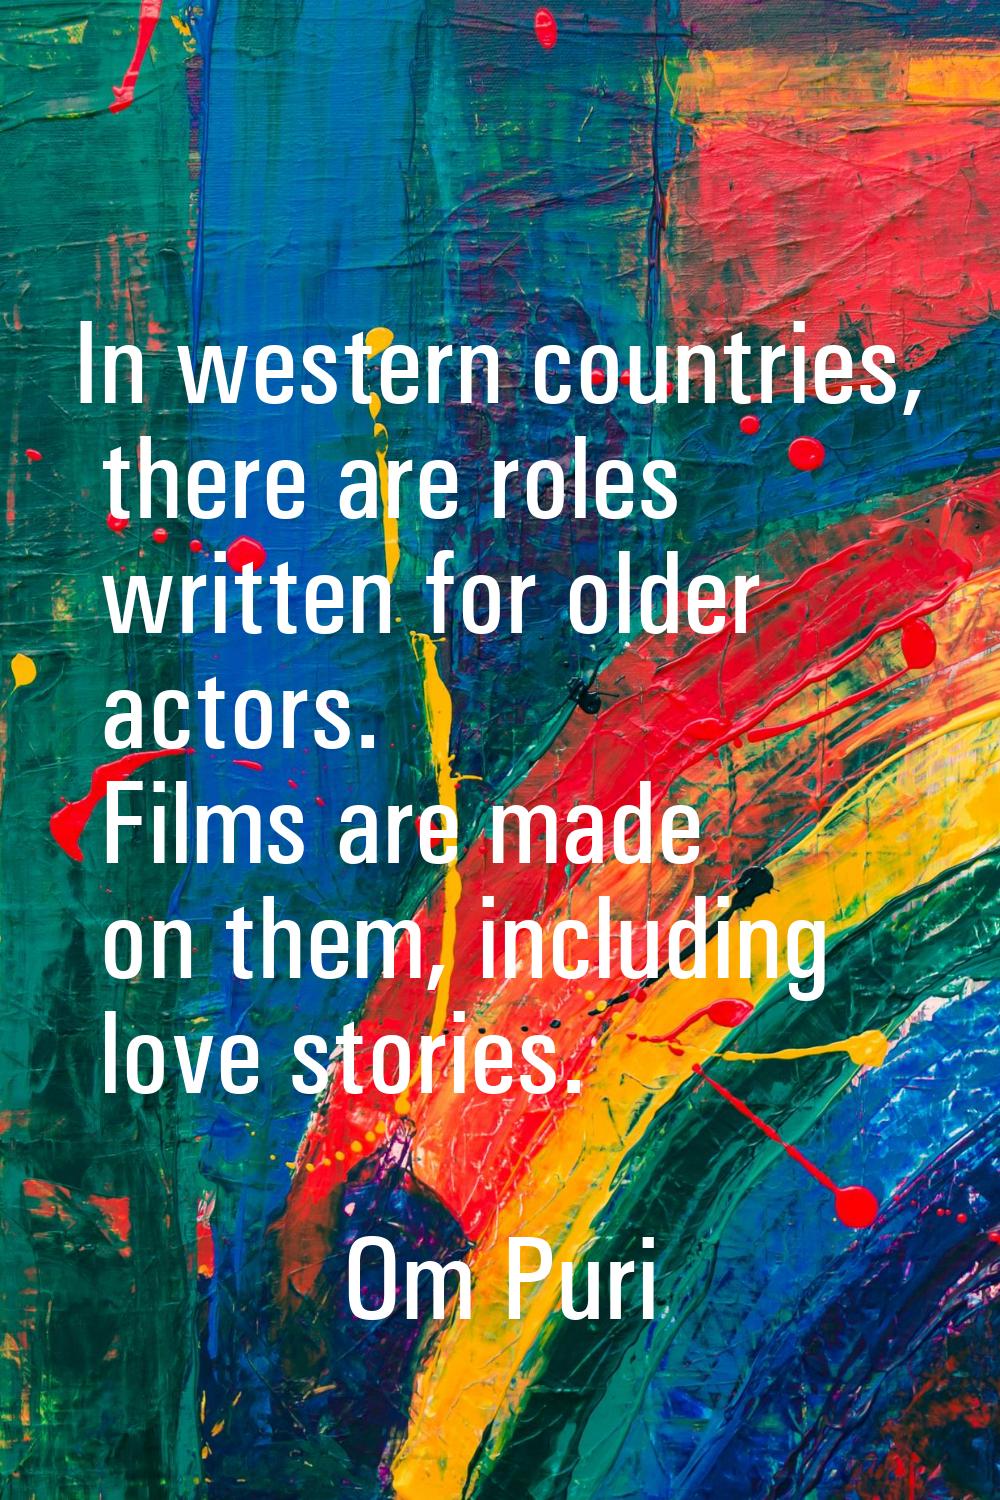 In western countries, there are roles written for older actors. Films are made on them, including l